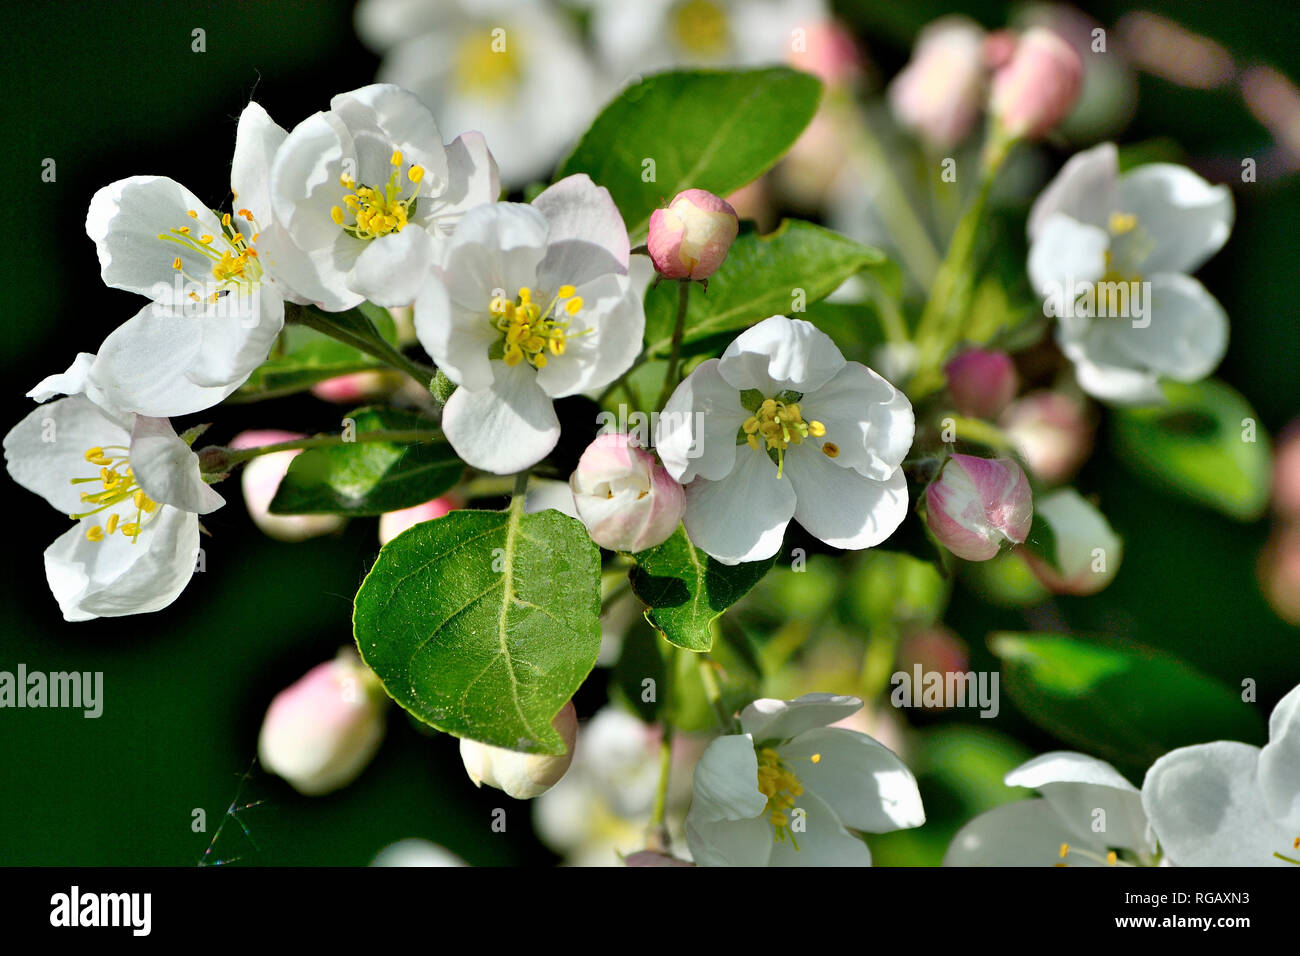 Apple tree blossom close up on a dark background - gentle spring background. Apple tree twig with white flowers, pink buds and green leaves - beauty o Stock Photo